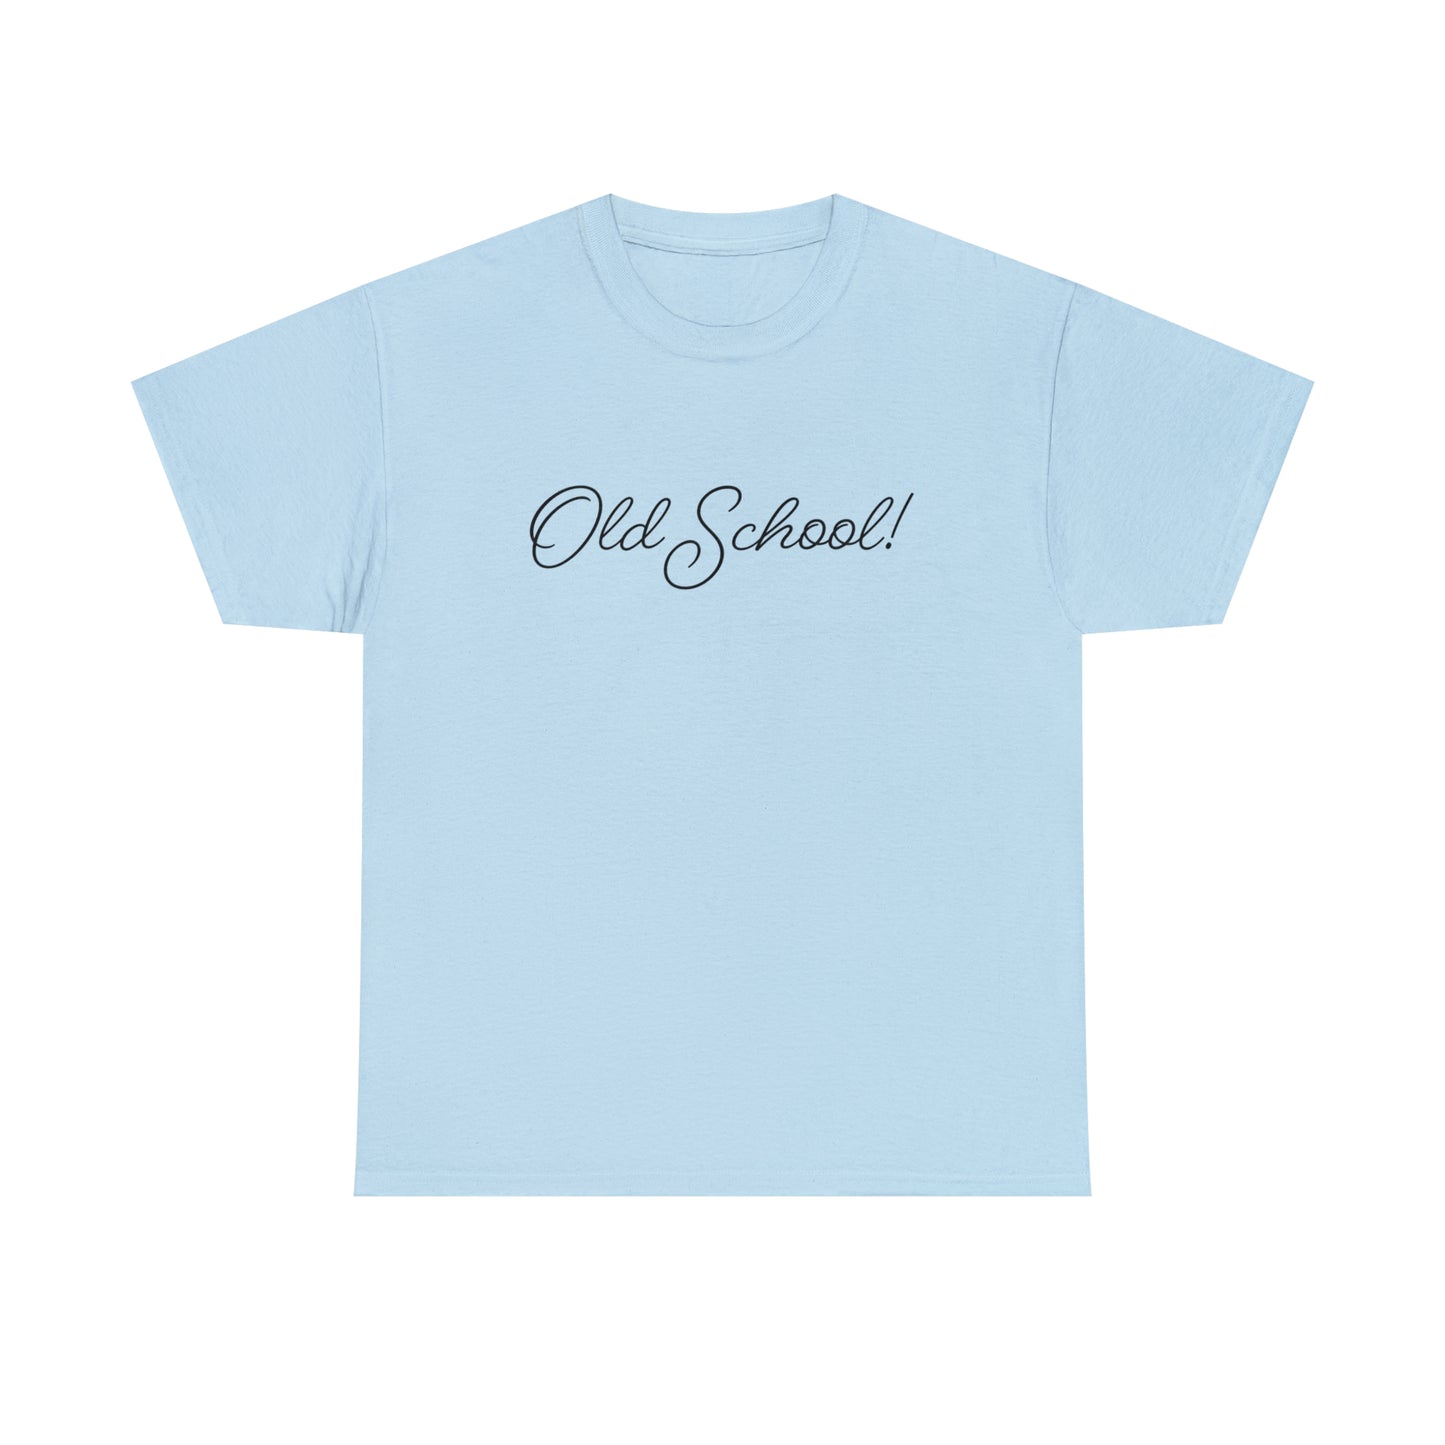 Old School T-Shirt For Retro TShirt For Smart People T Shirt For Baby Boomer T Shirt With Cursive Shirt For Education Gift